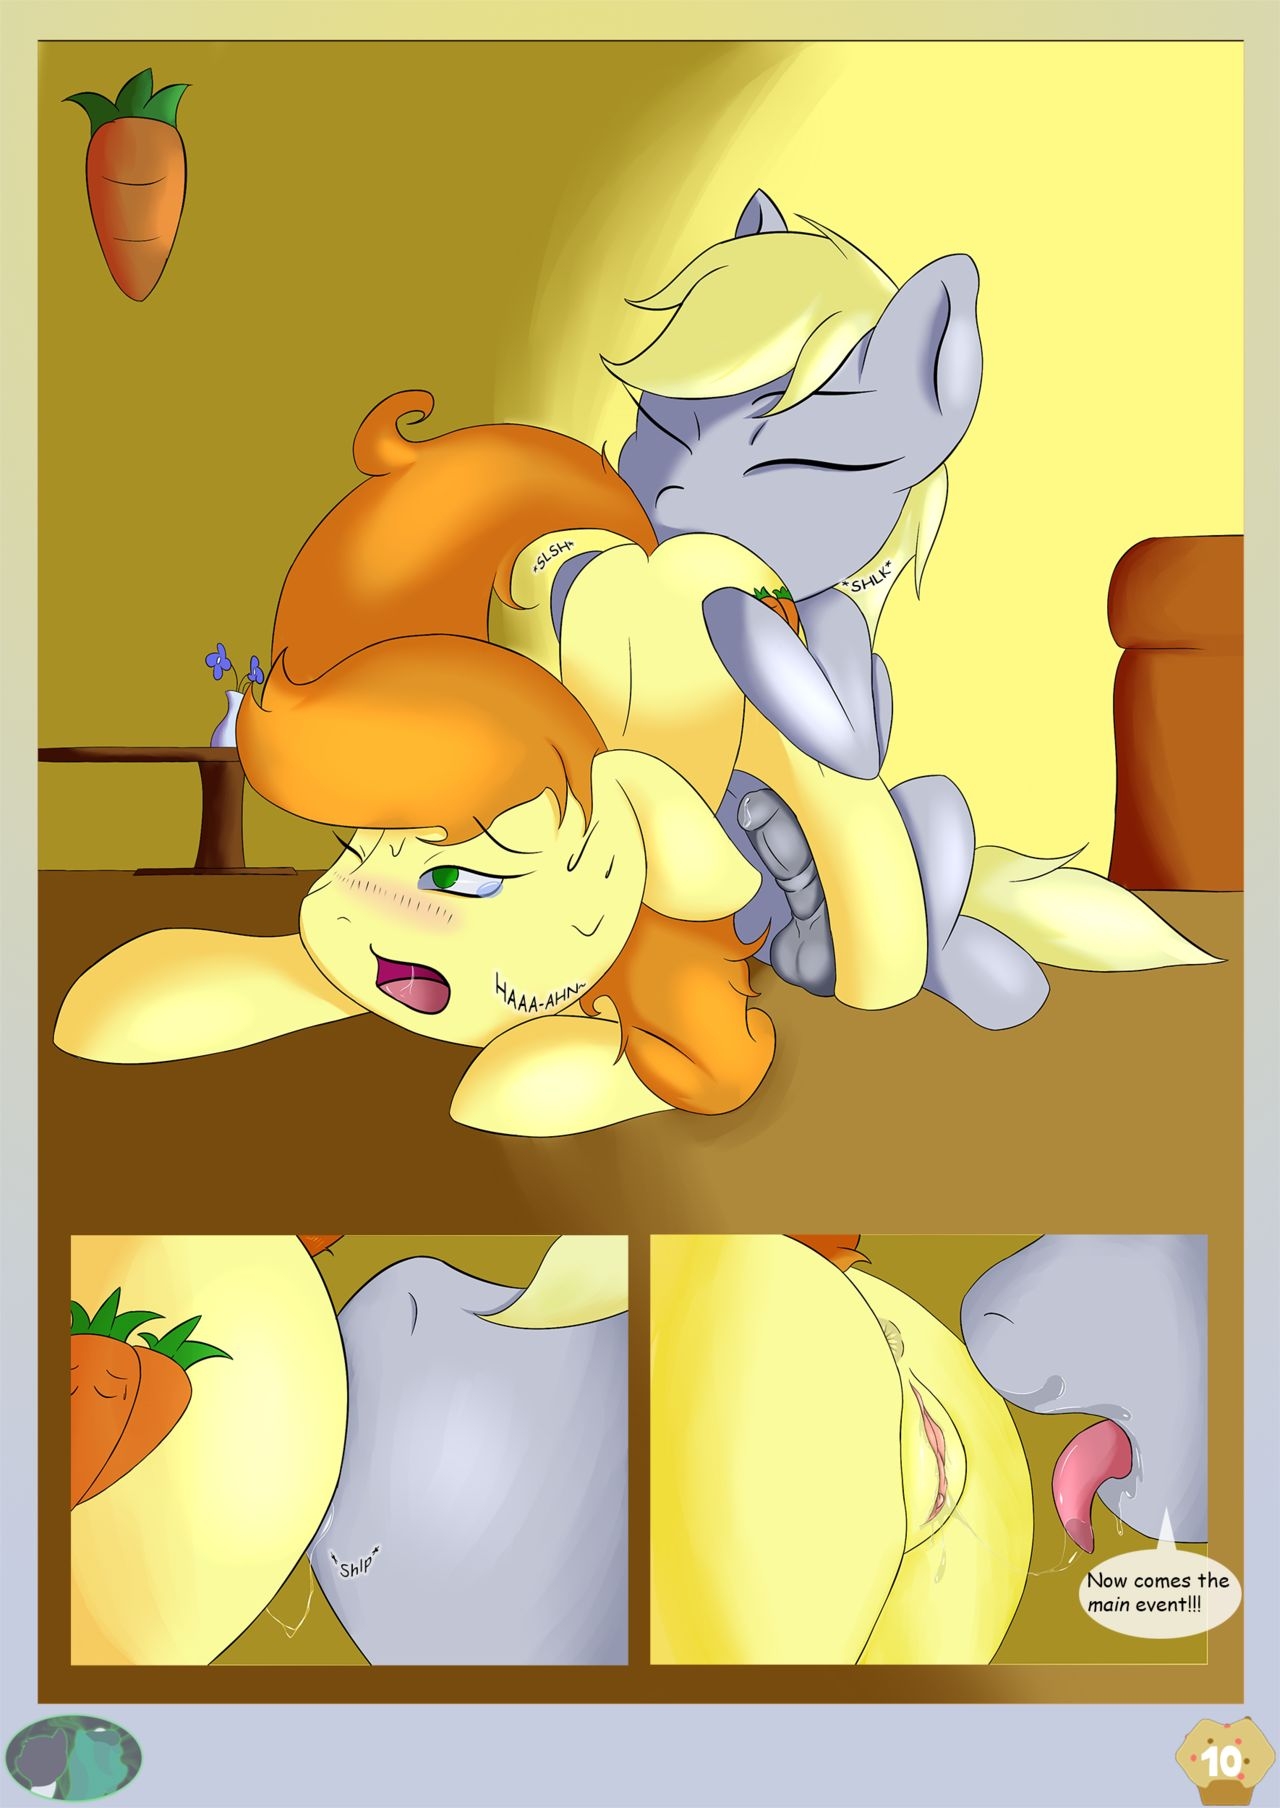 [K12] Carrots & Muffins Comic (My Little Pony Friendship Is Magic) [Ongoing] 10